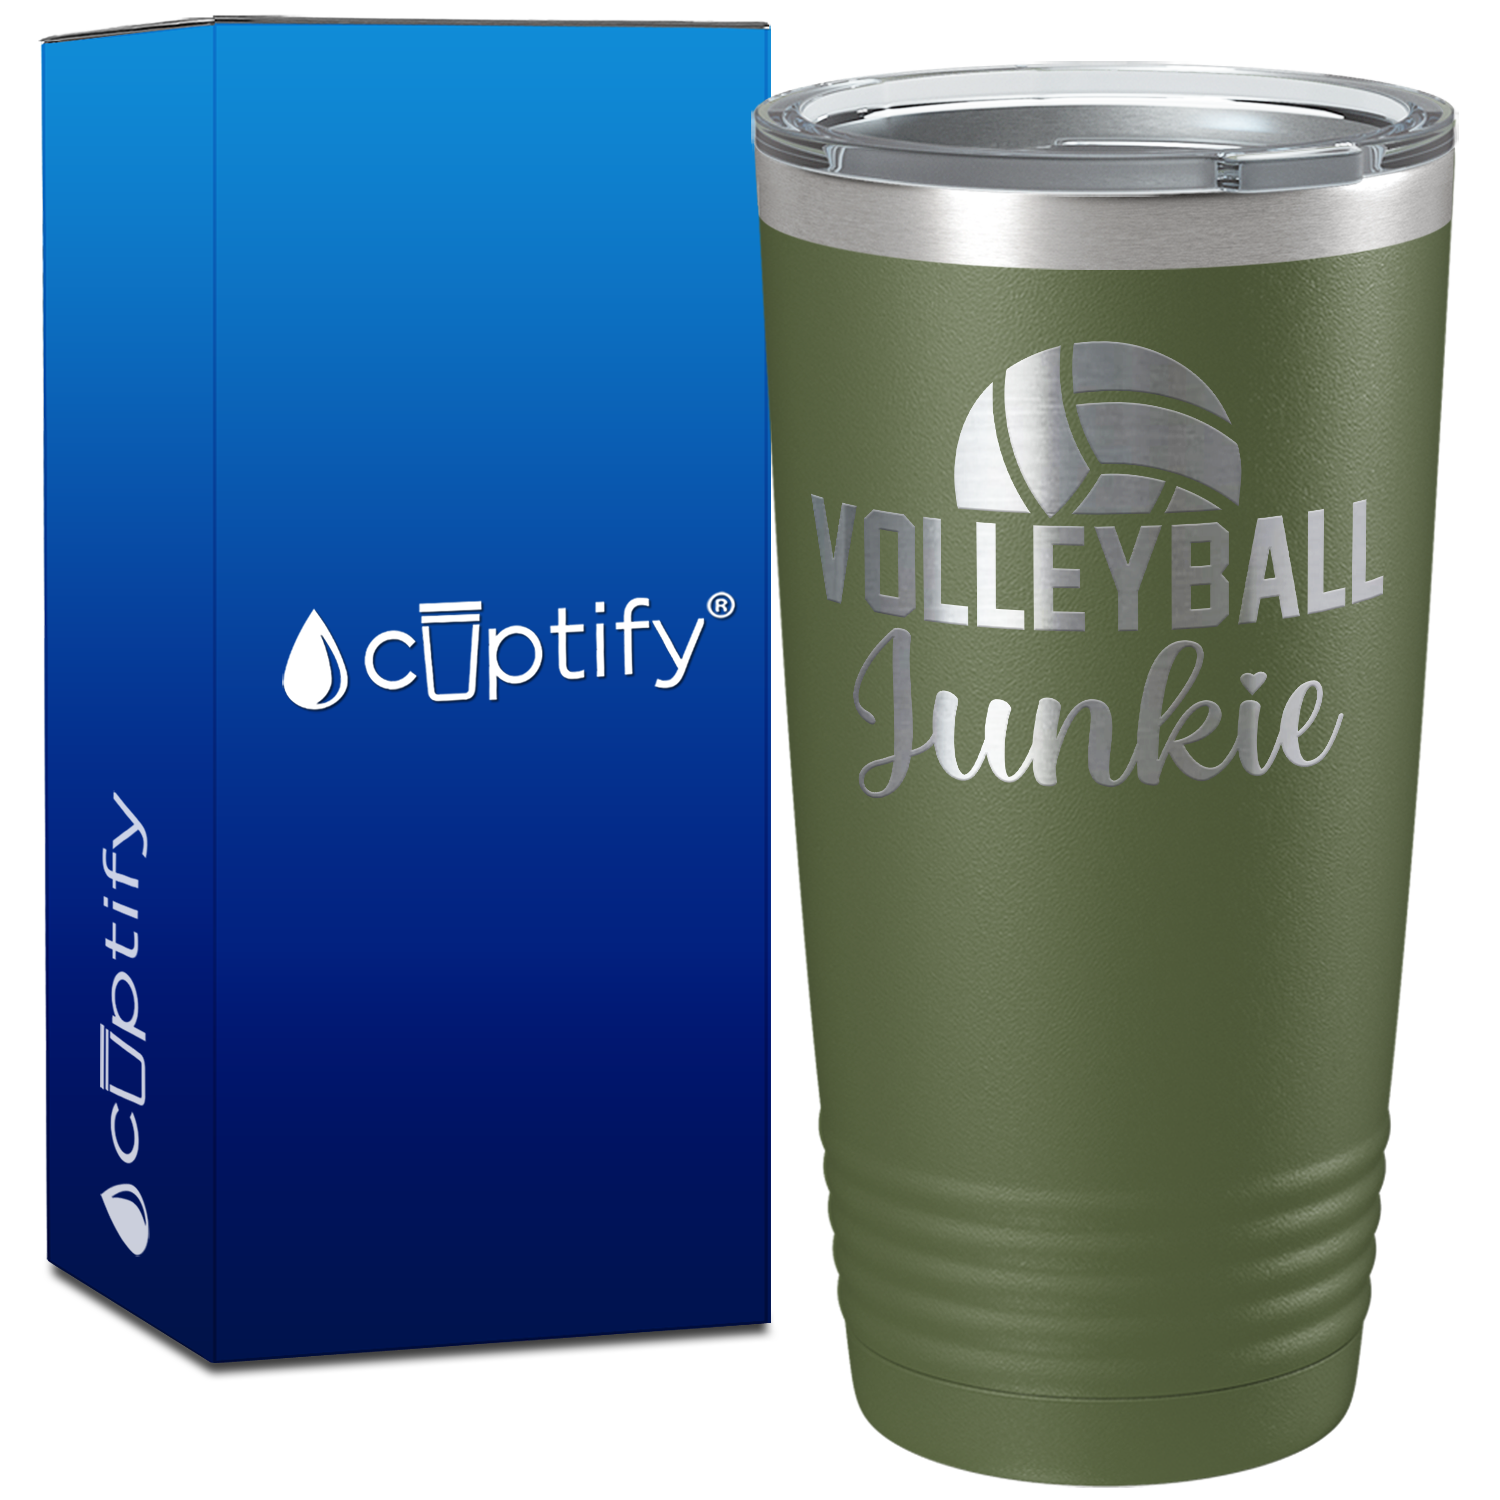 Volleyball Junkie on 20oz Volleyball Tumbler